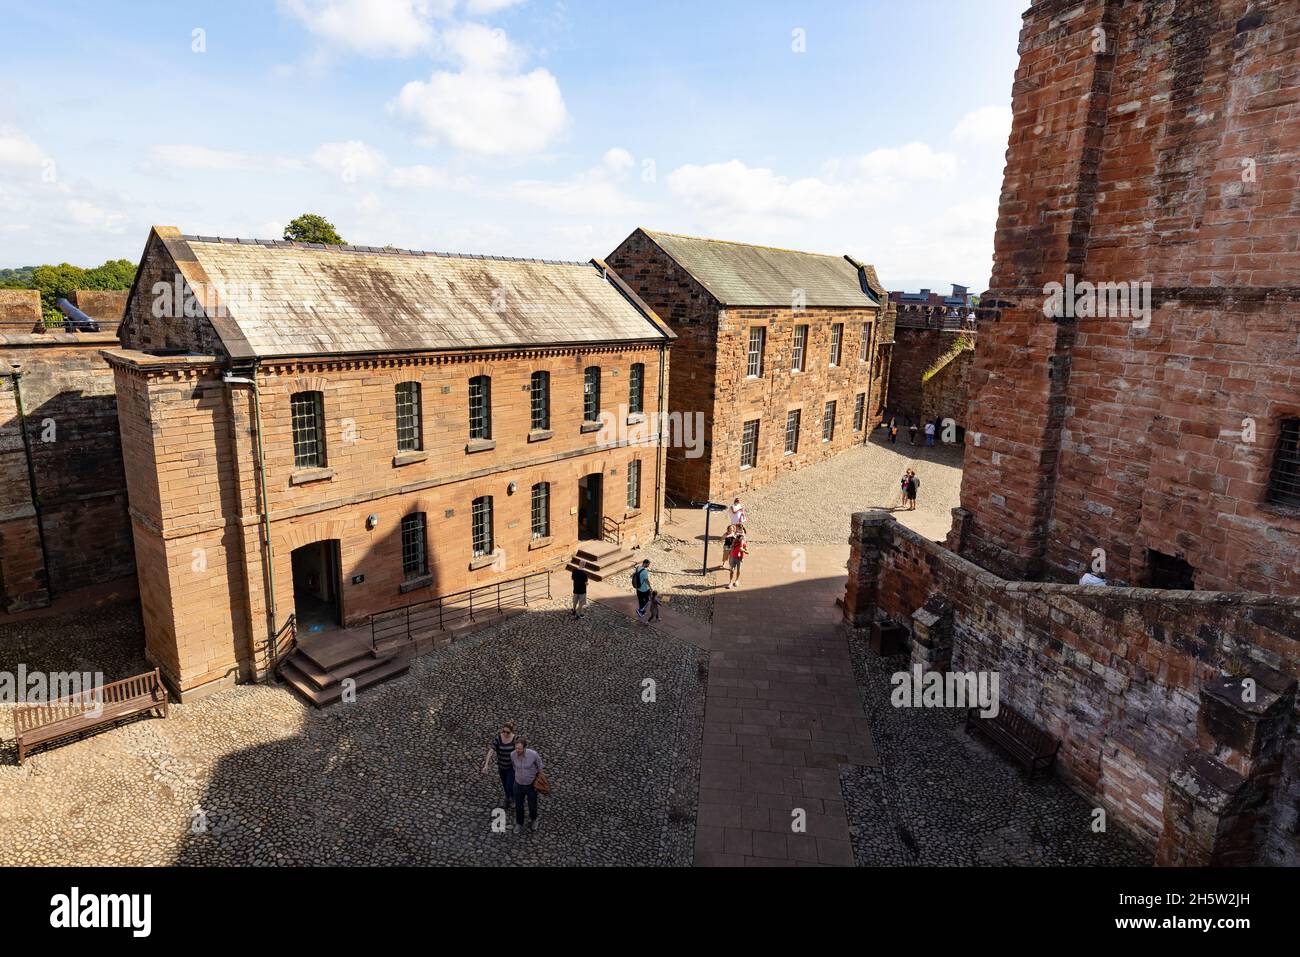 Carlisle Castle - view of the Keep and Out buildings within the medieval 11th century castle walls, Carlisle, Cumbria England UK Stock Photo